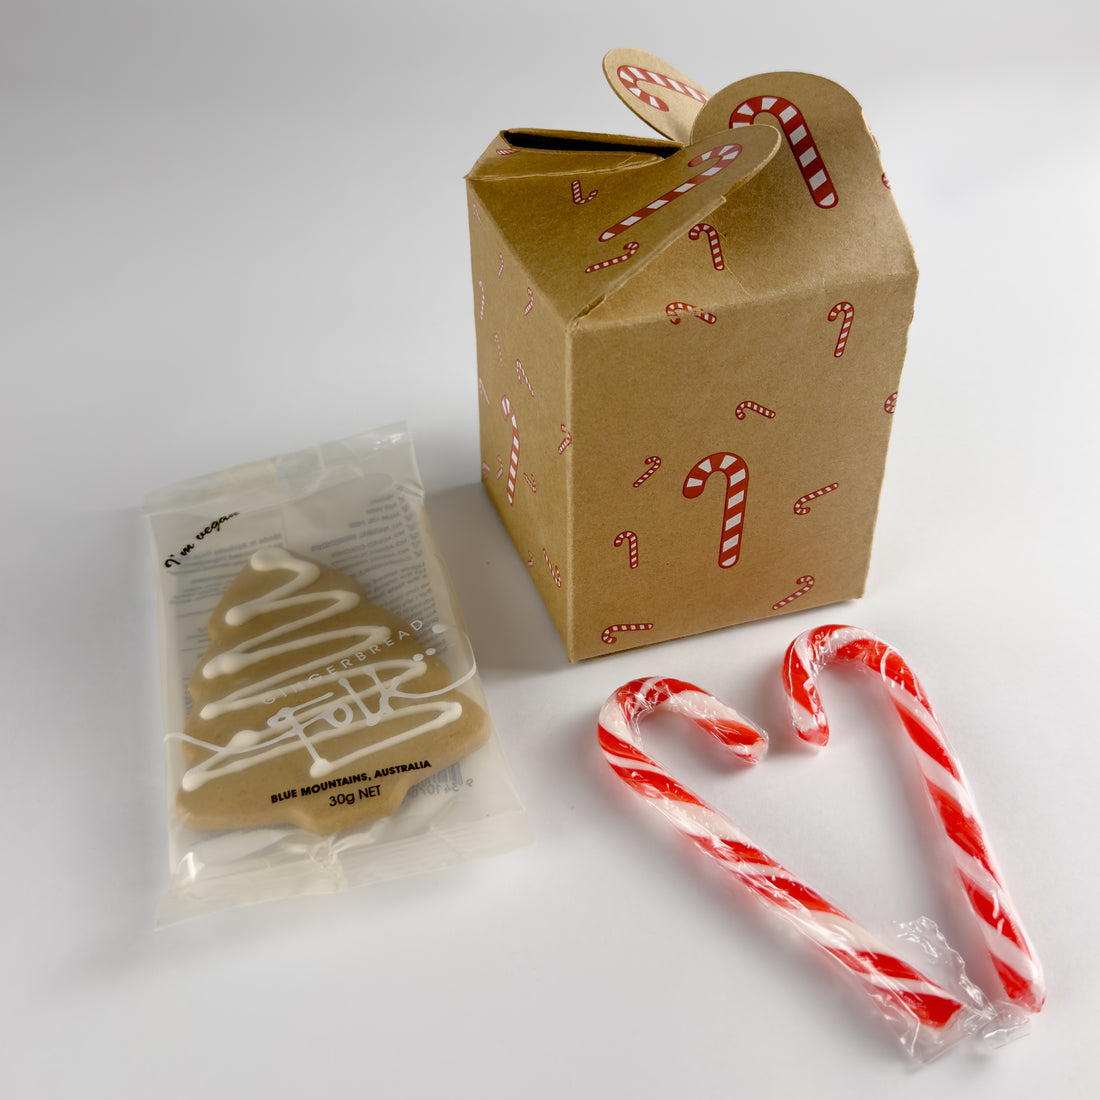 Christmas Candy Cane Promotion - Free With Every Candle Purchase